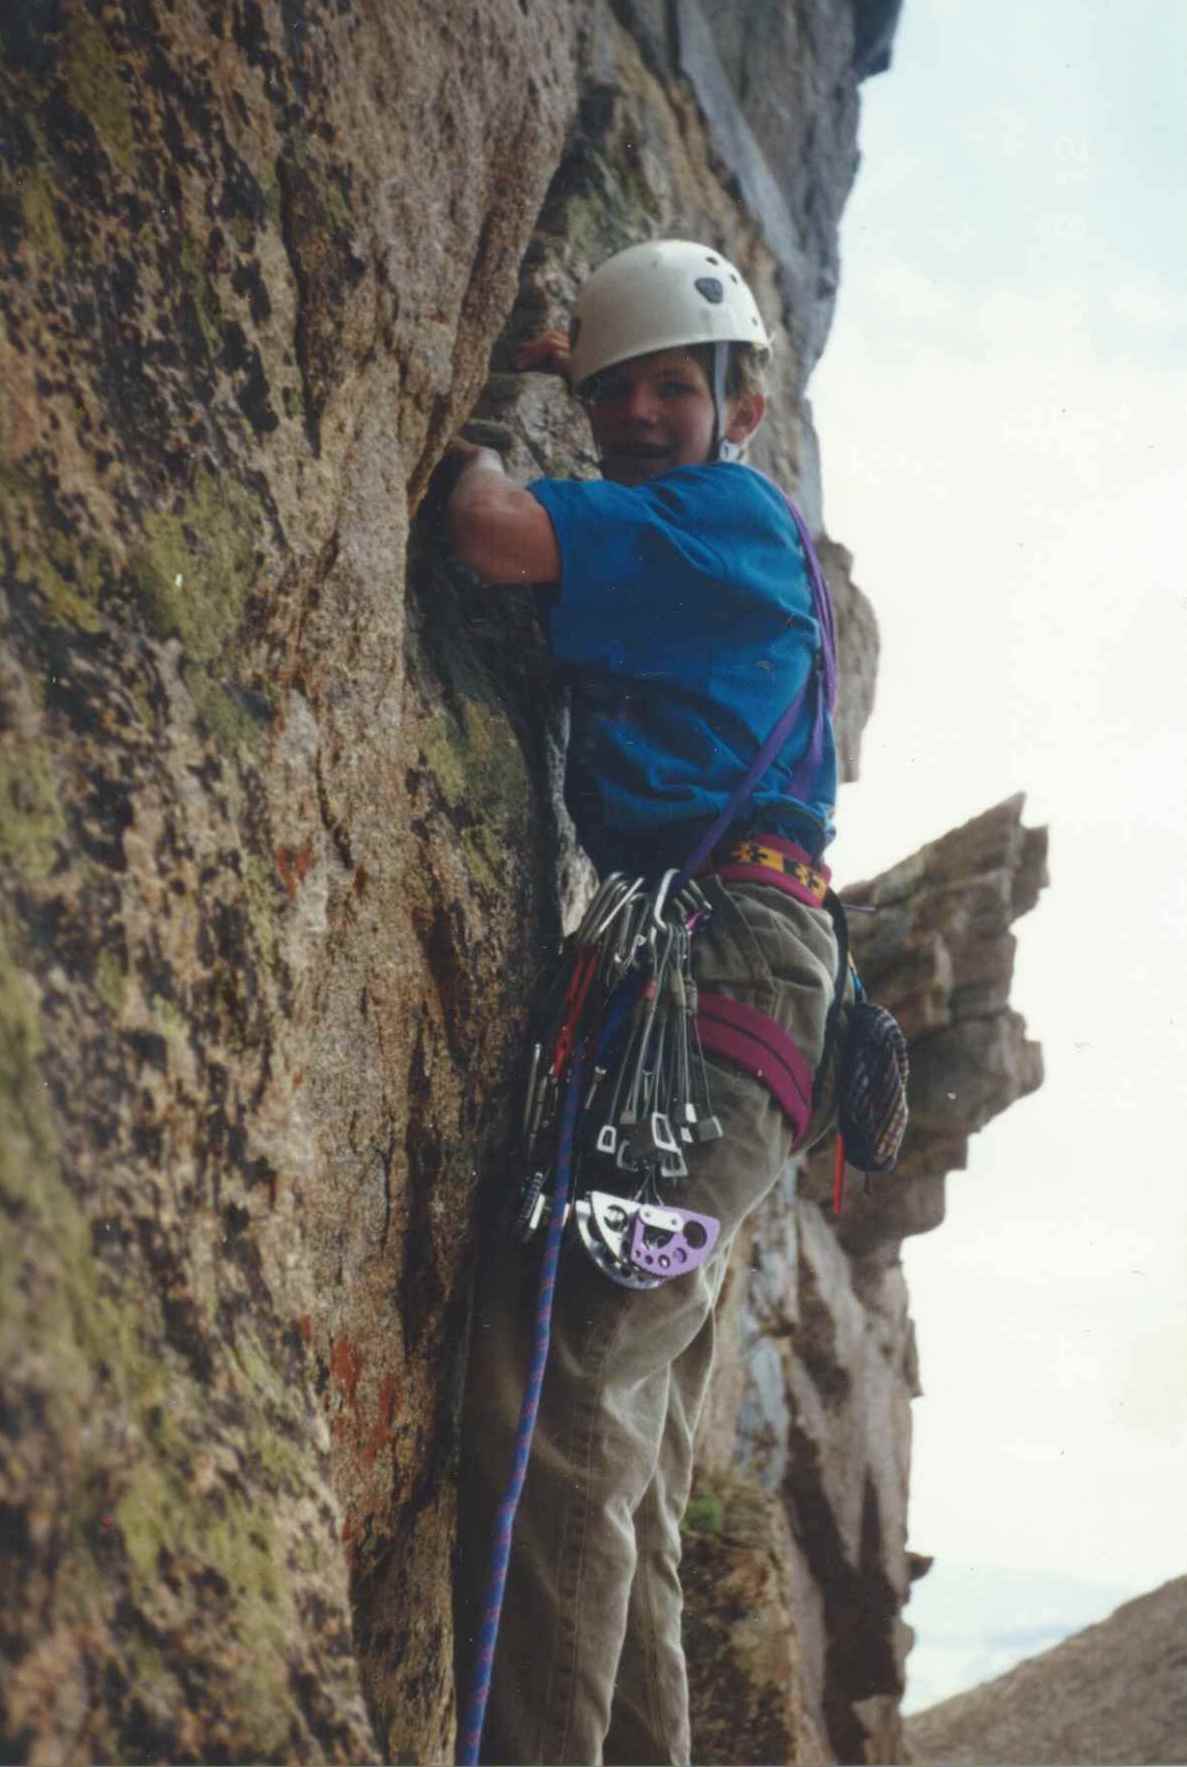 Franz tops out his first 5.10 lead at age 15 in 1998: Directissima [stet] (III 5.10b, 4 pitches), Chasm View Wall, Longs Peak, Colorado. [Photo] Warren Franz